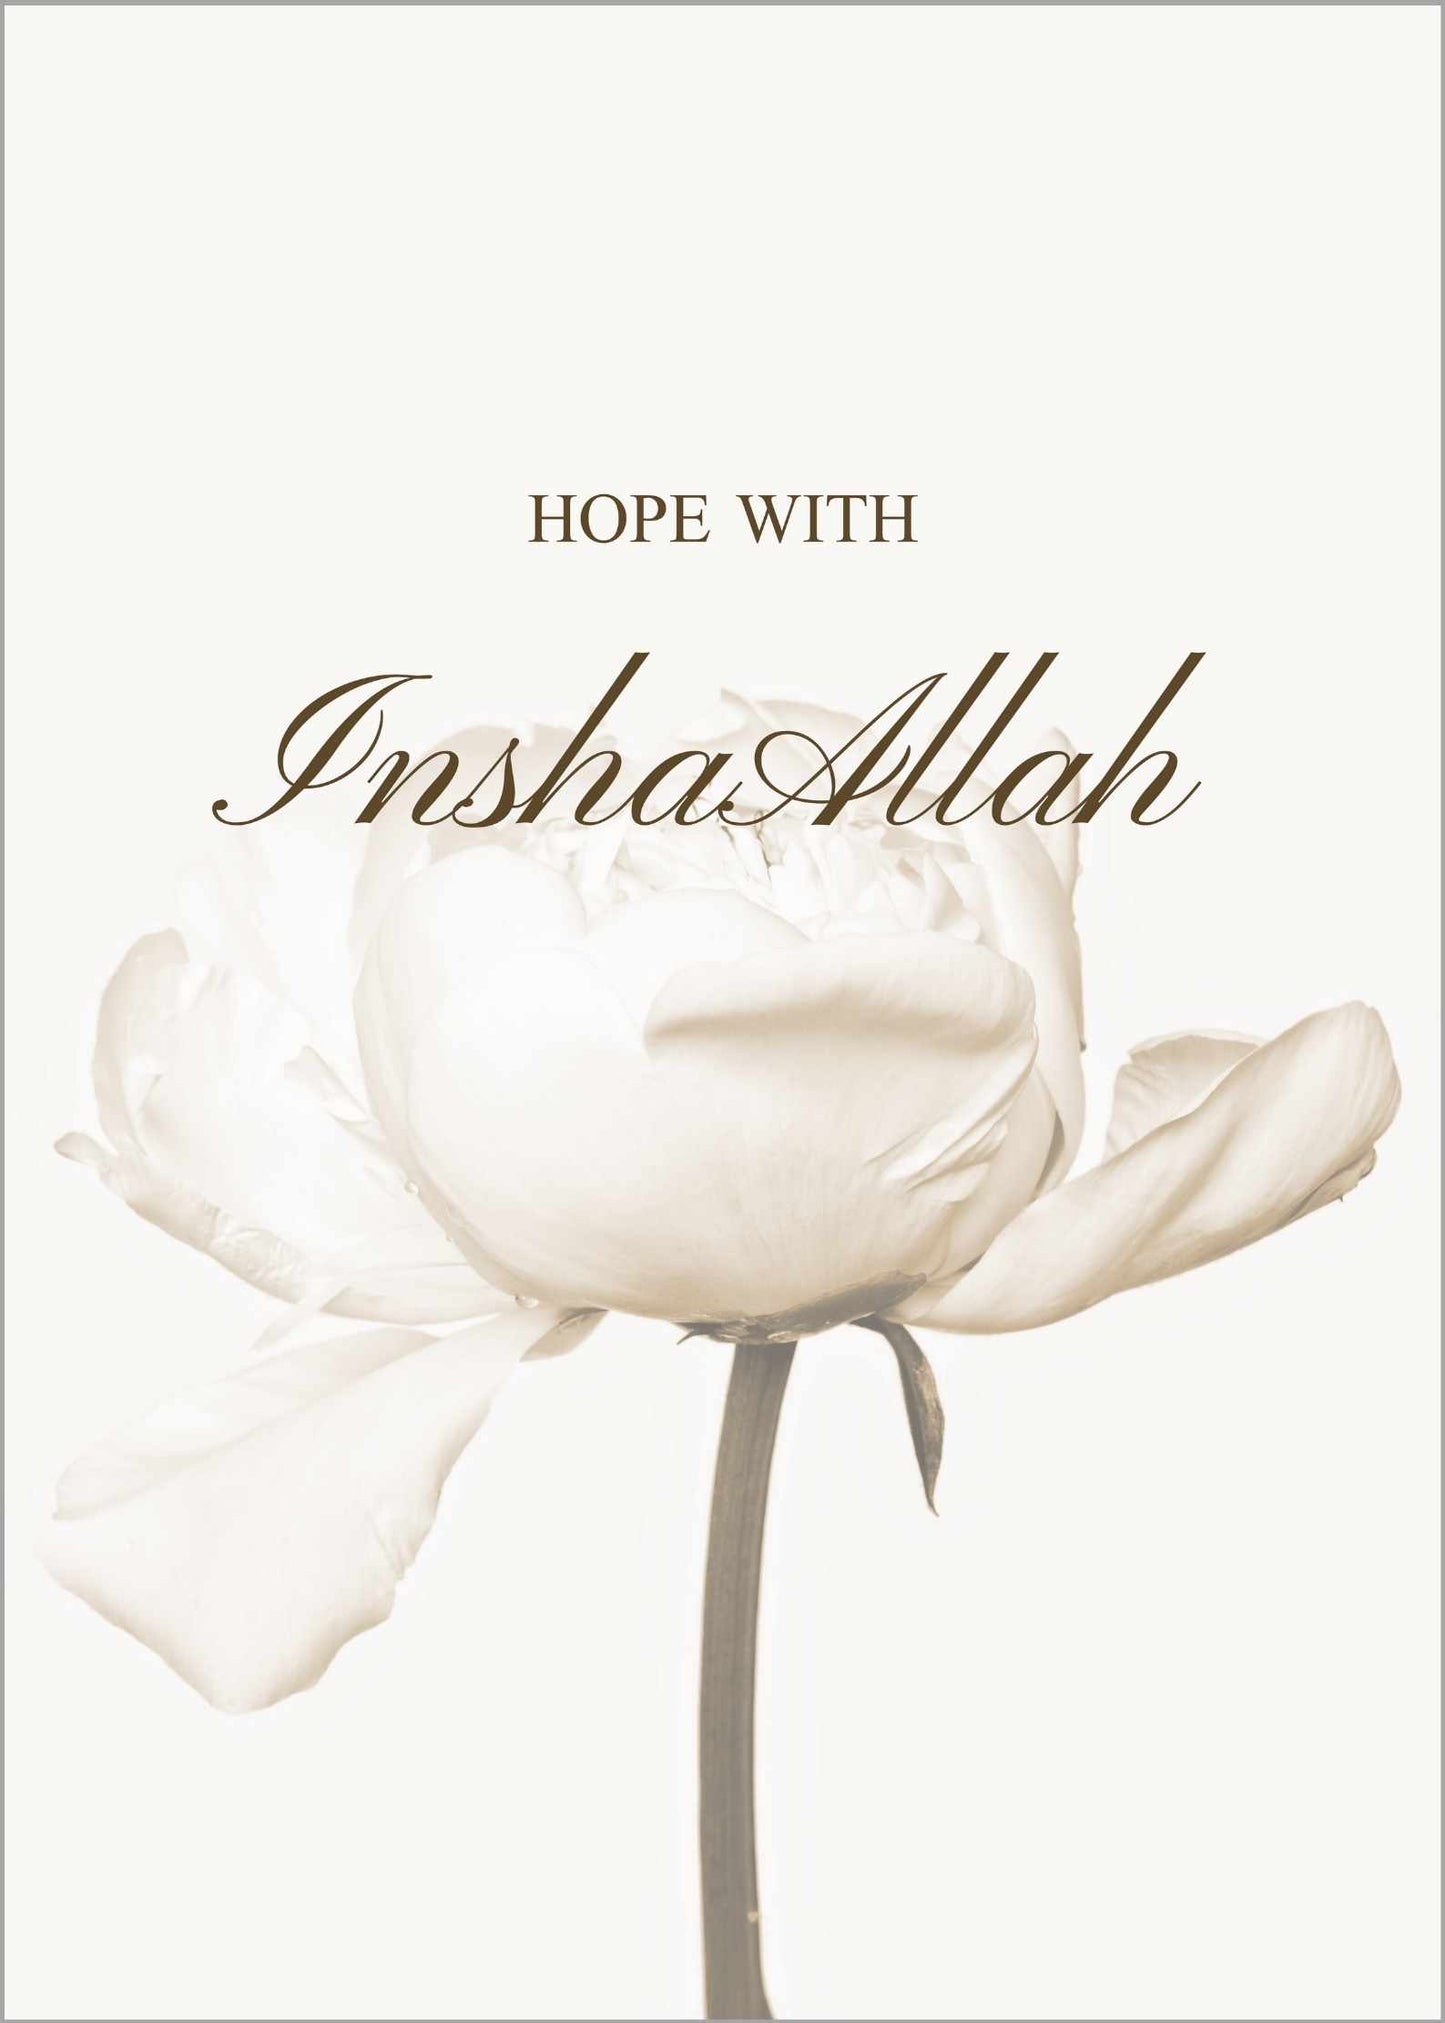 Hope with InshaAllah No.1 (beige)